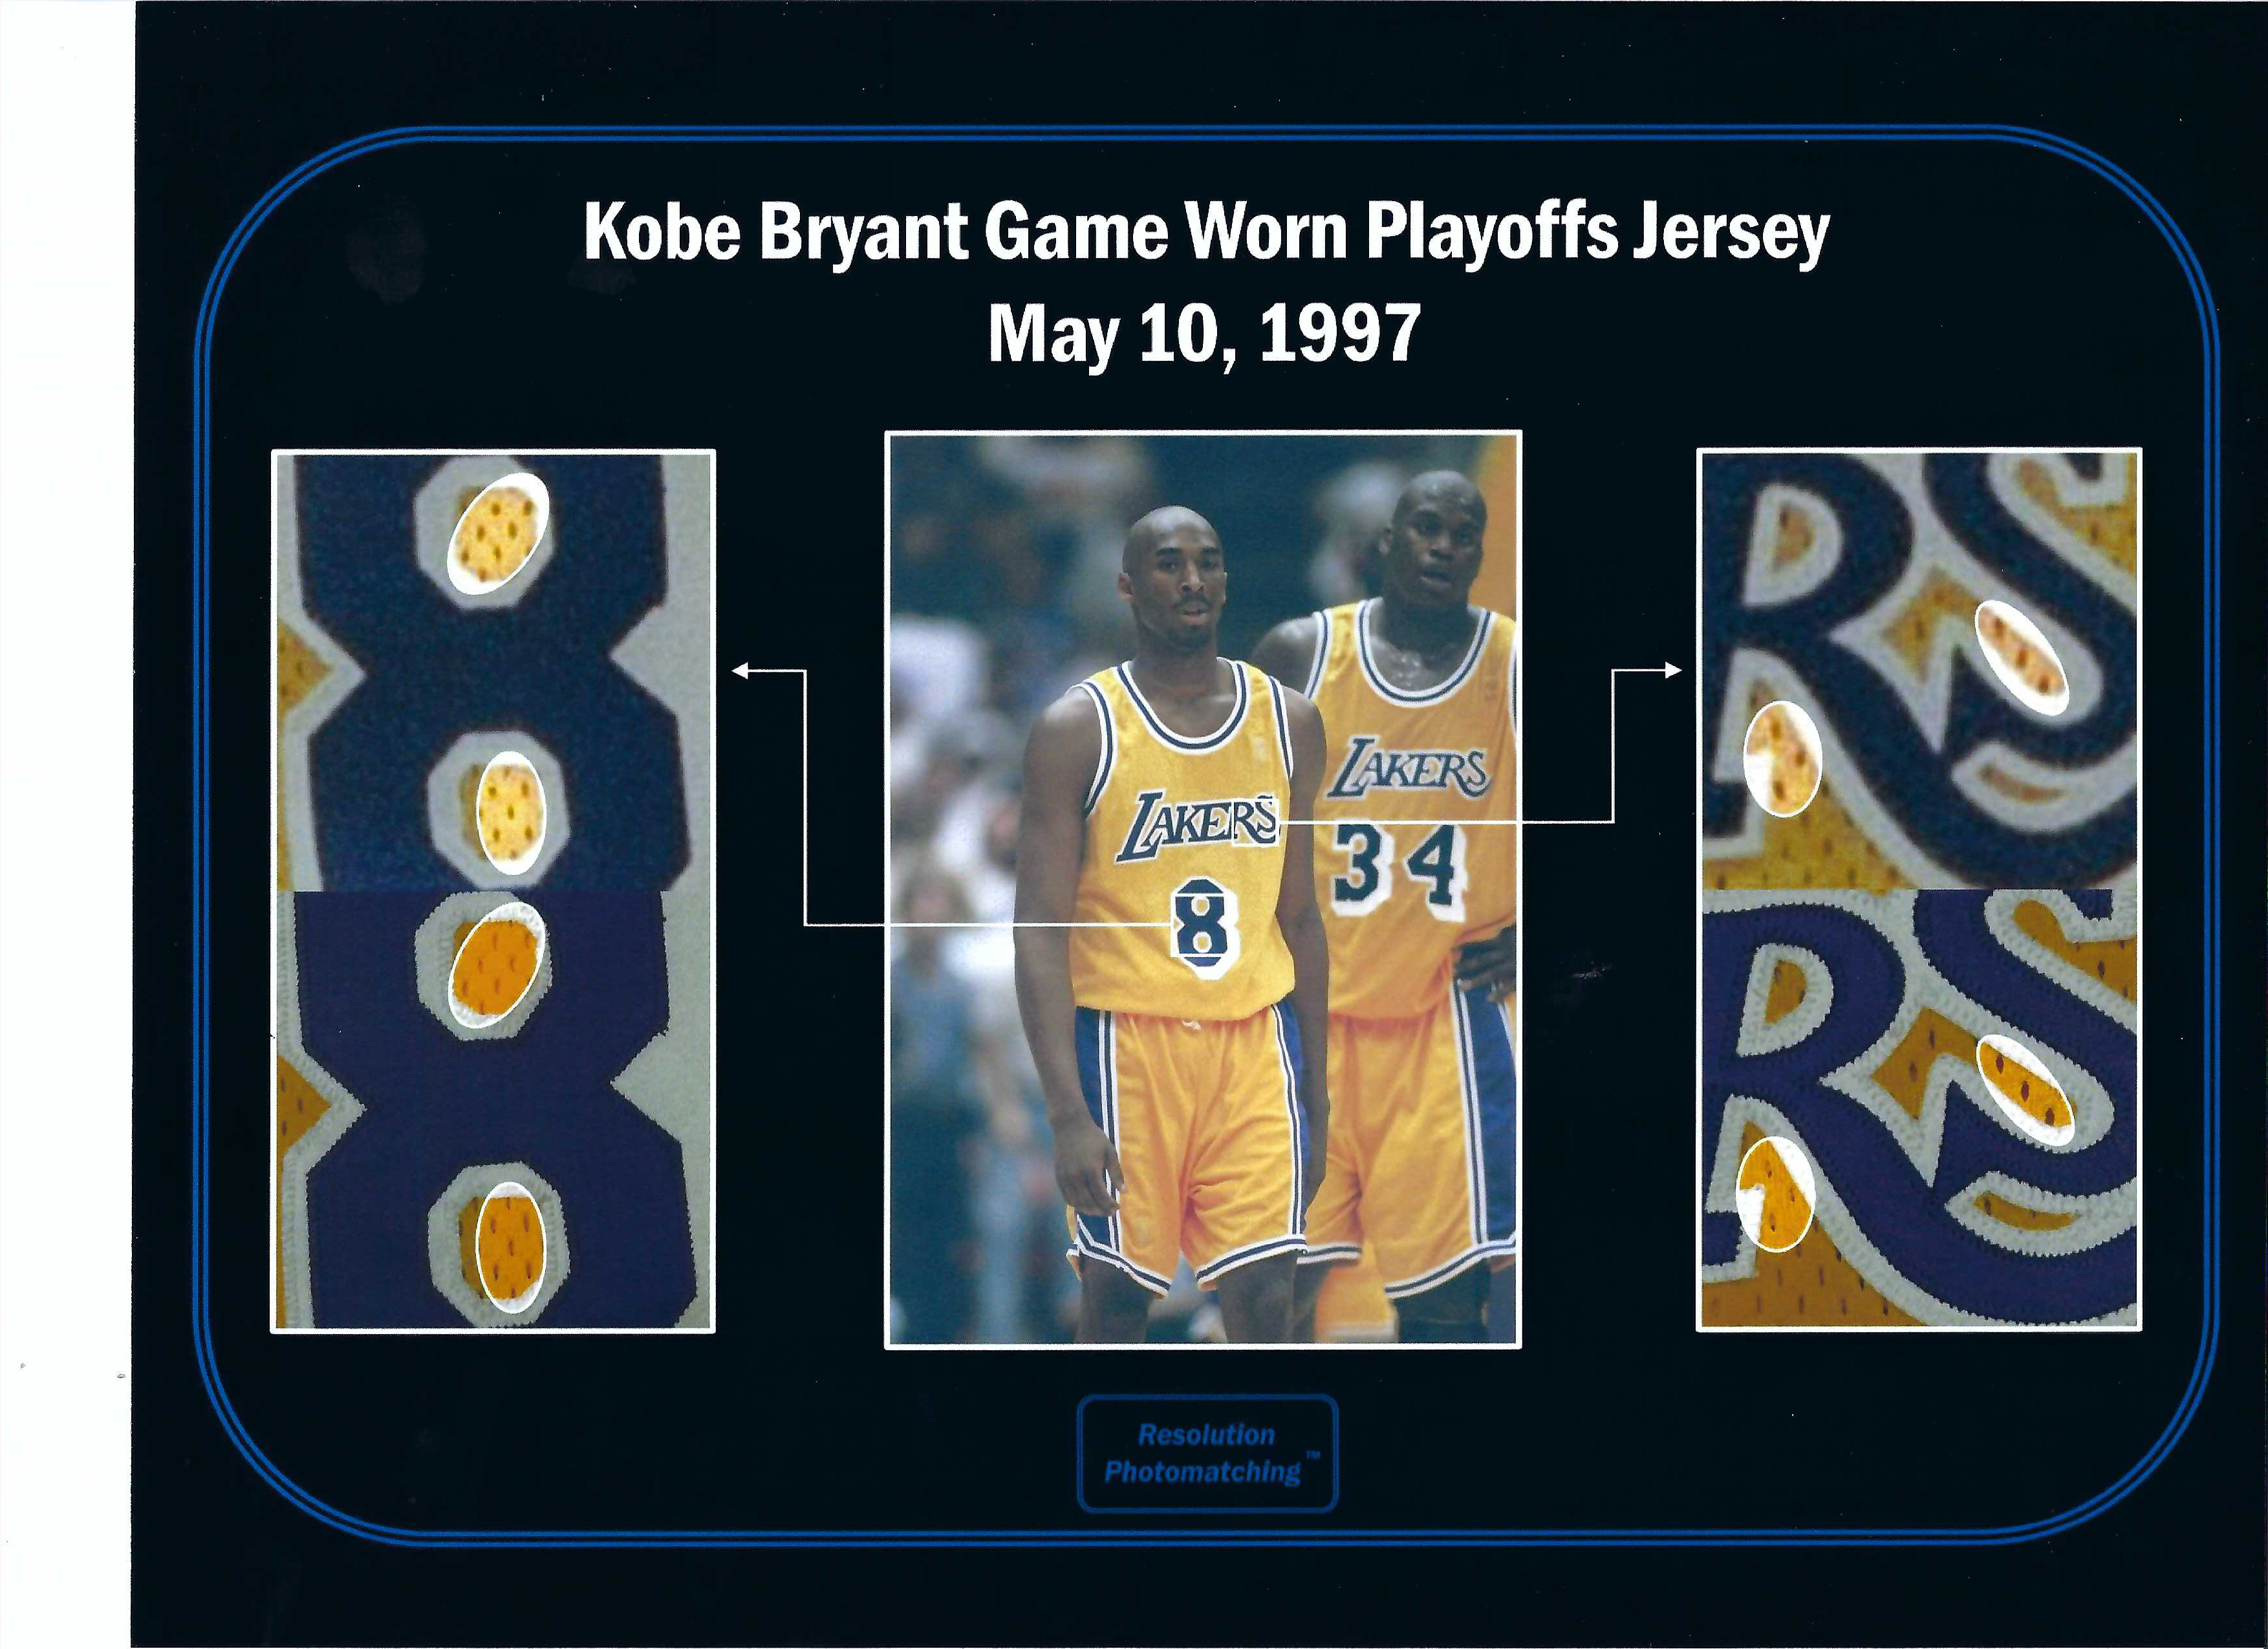 Lot Detail - NEWLY UNCOVERED 1996-97 KOBE BRYANT L.A. LAKERS GAME WORN  ROOKIE HOME JERSEY PHOTOMATCHED TO 5 GAMES - ONLY KNOWN KOBE ROOKIE JERSEY  MATCHED TO PLAYOFFS! - MEIGRAY, RESOLUTION & SPORTS INVESTORS LOA'S